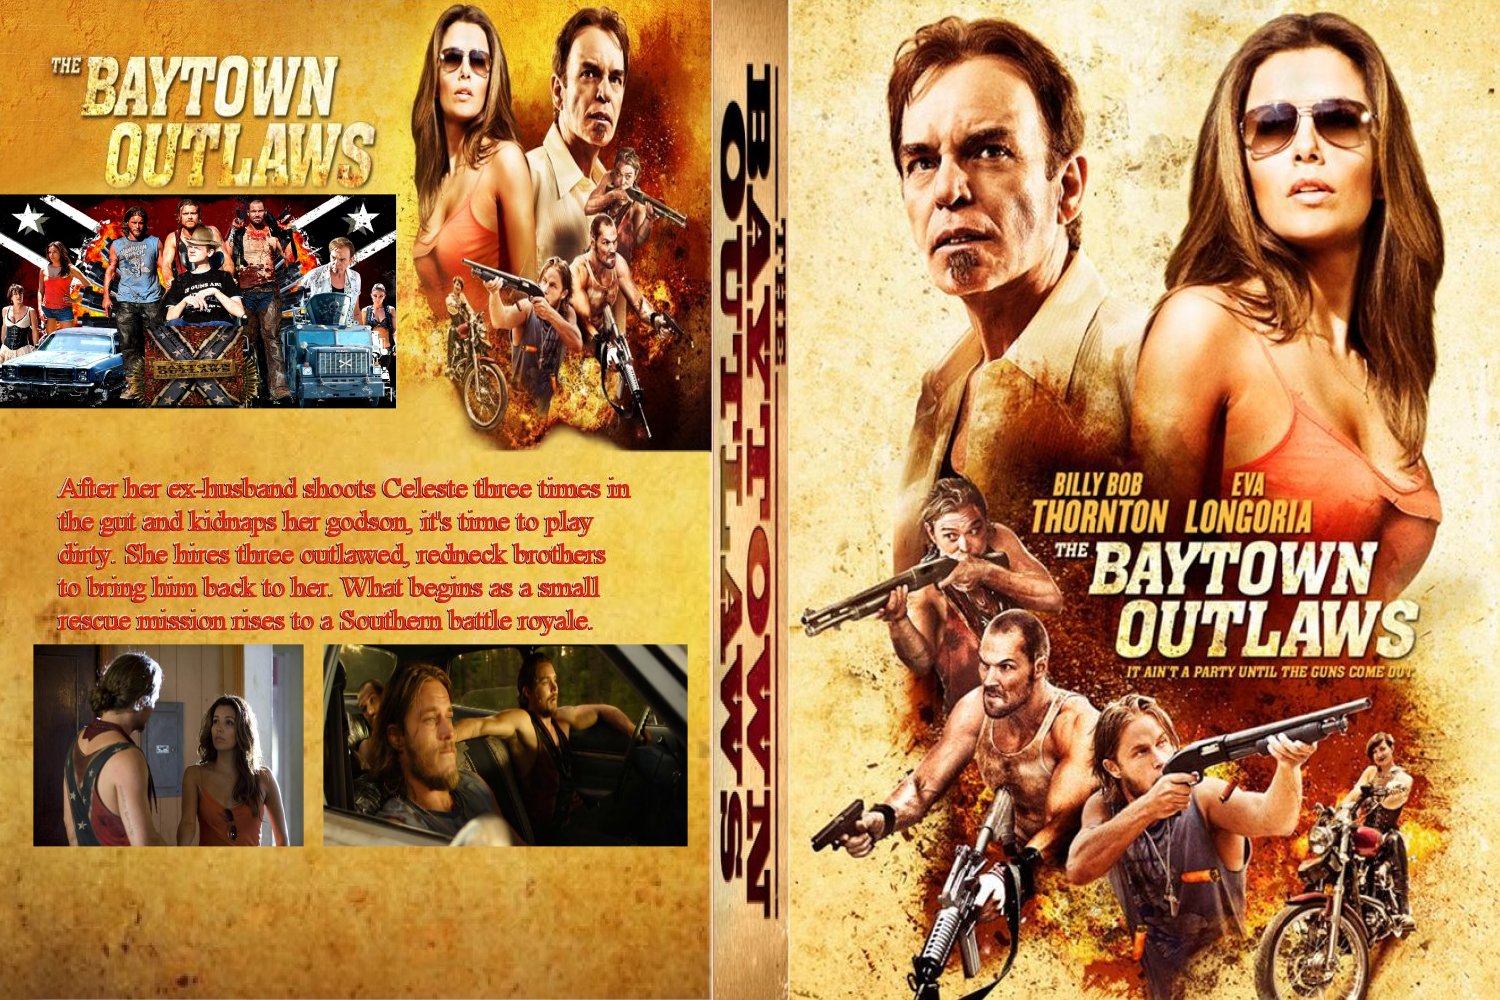 The Baytown Outlaws 2012 Full Movie Online In Hd Quality